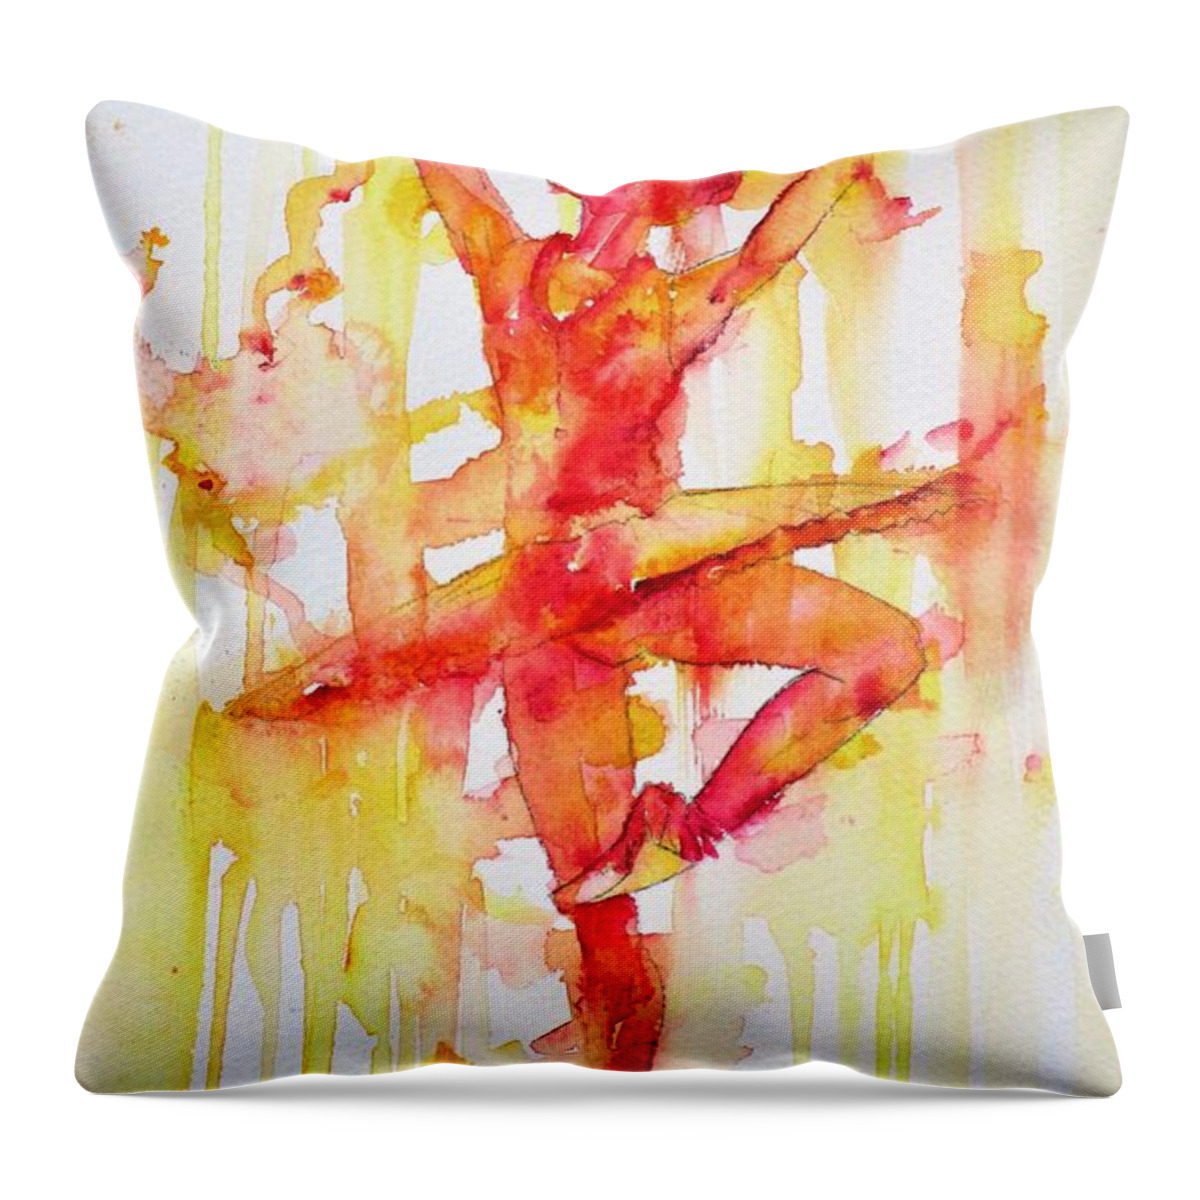 Ballerina Throw Pillow featuring the painting Watercolor Ballerina.3 by Fabrizio Cassetta